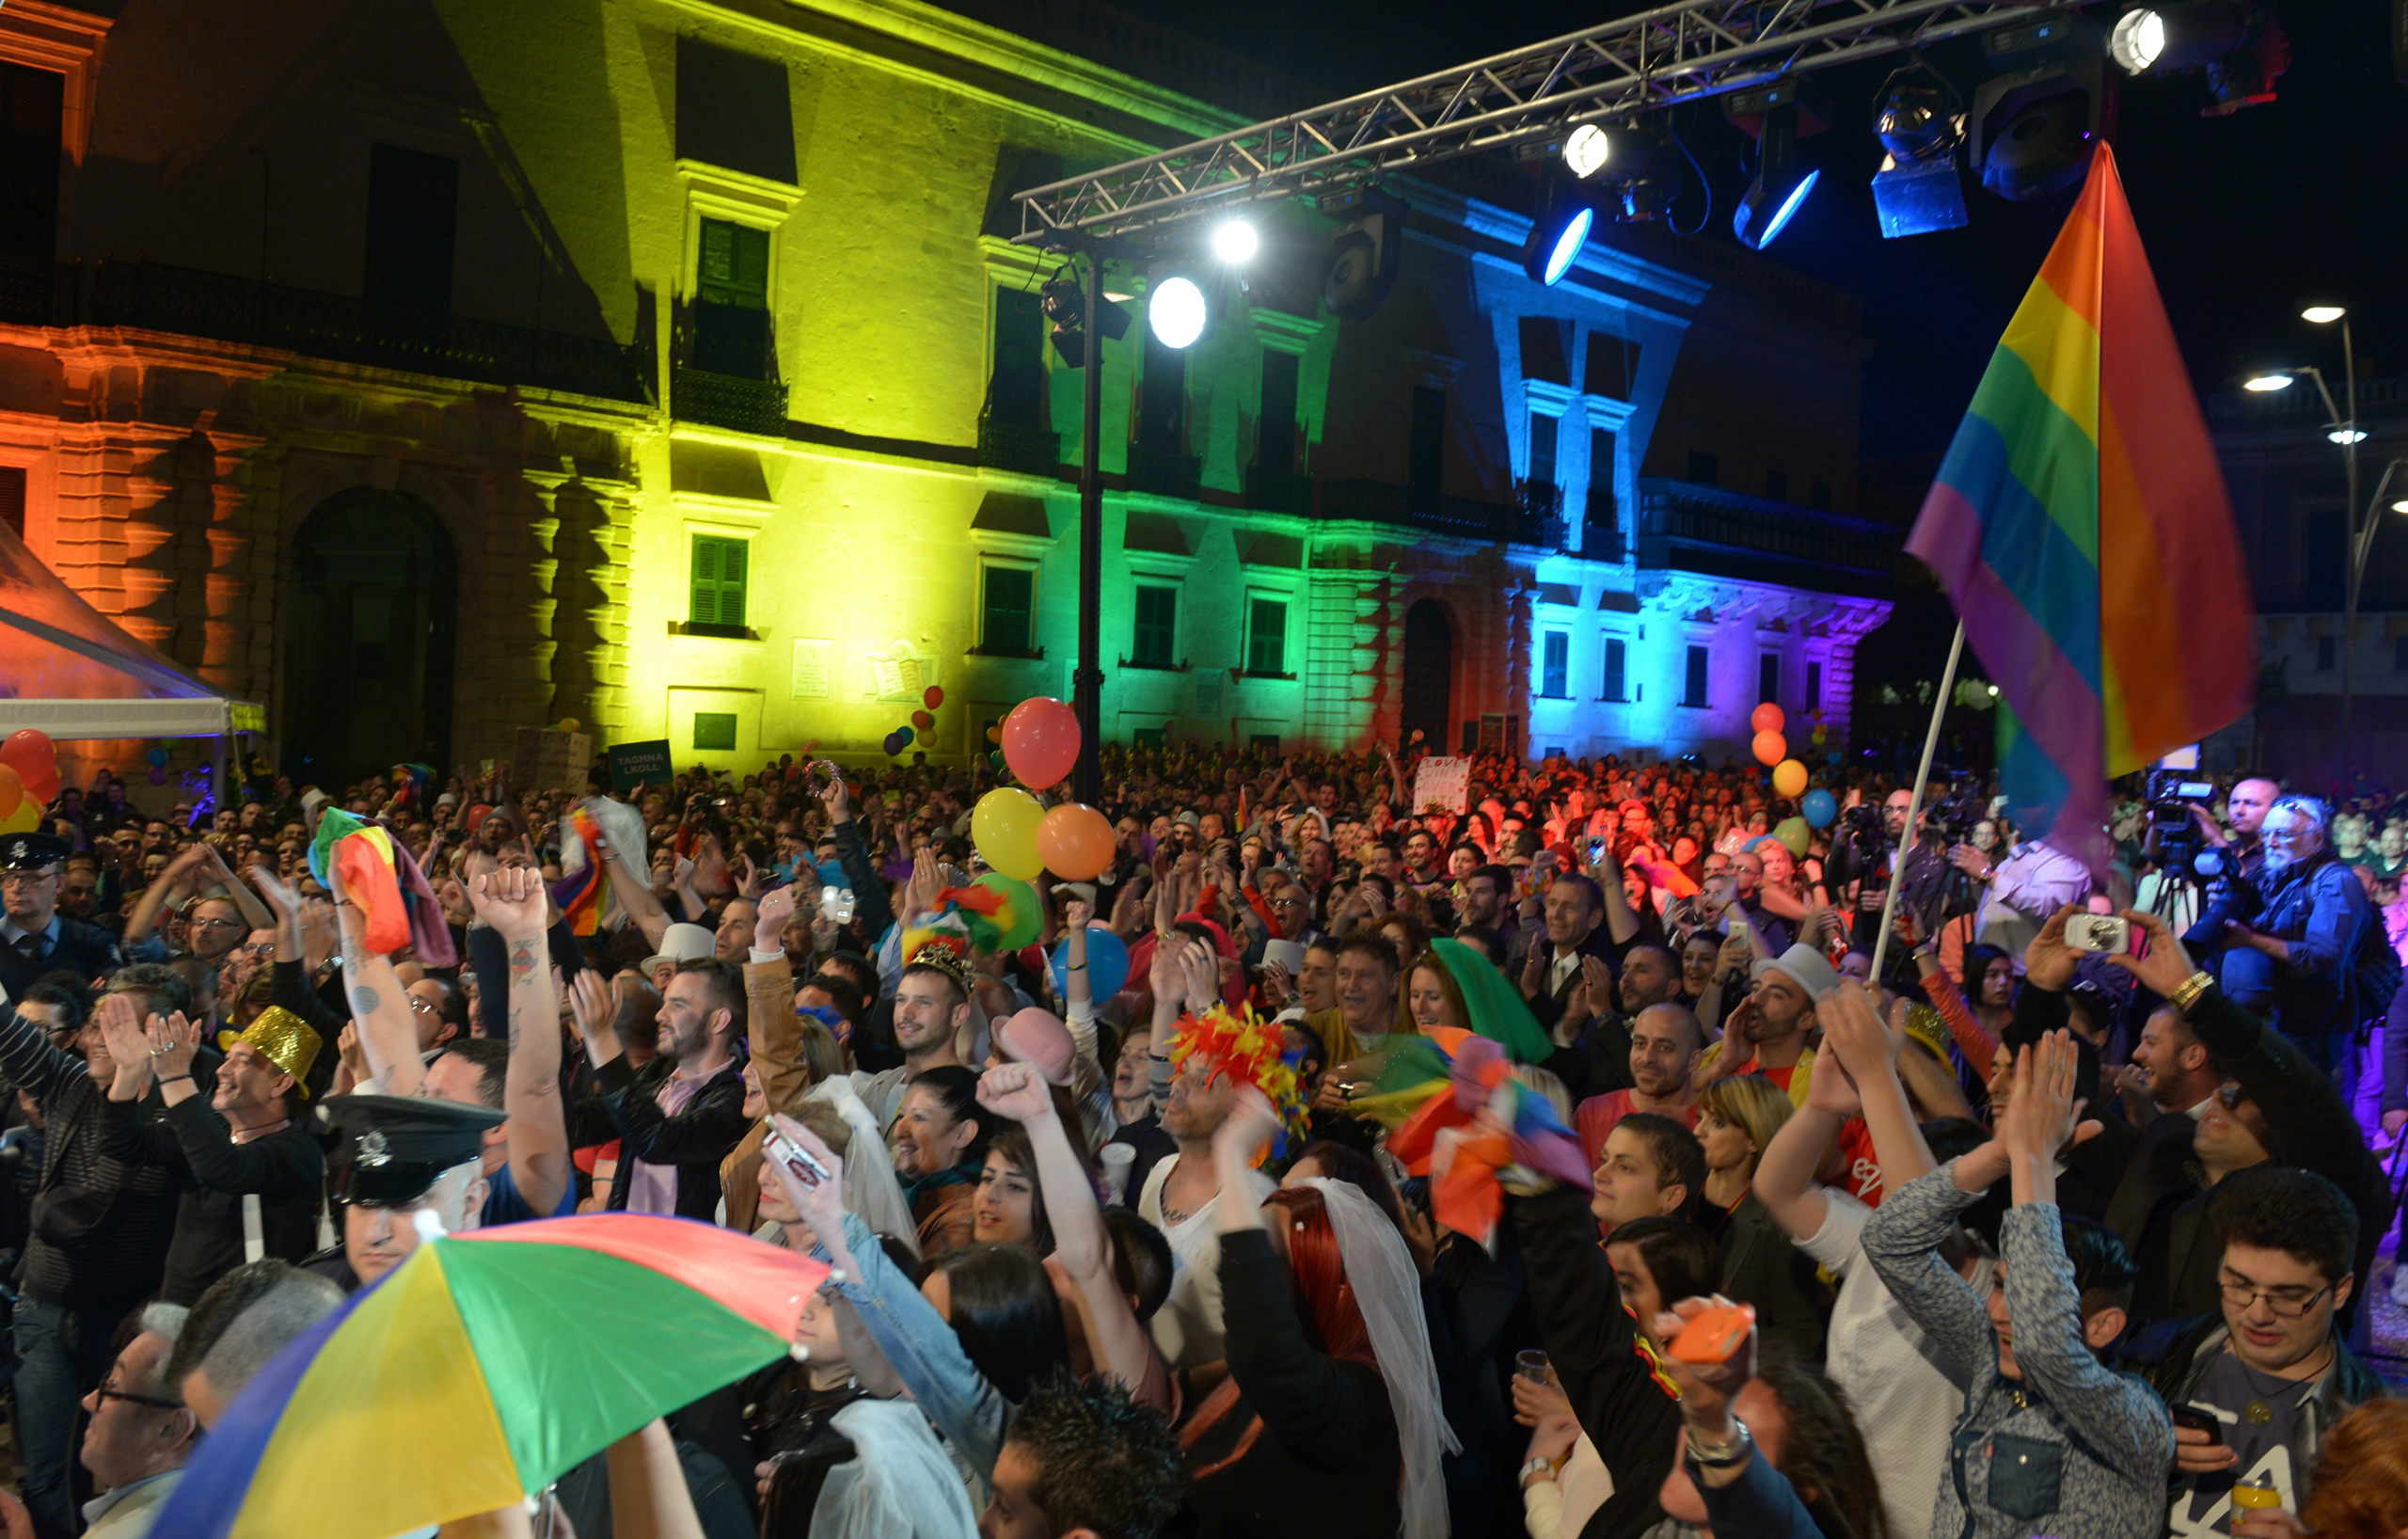 People celebrate in Saint George's Square after the Maltese parliament approved a civil unions bill in Valletta on April 14, 2014. (Matthew Mirabelli—AFP/Getty Images)